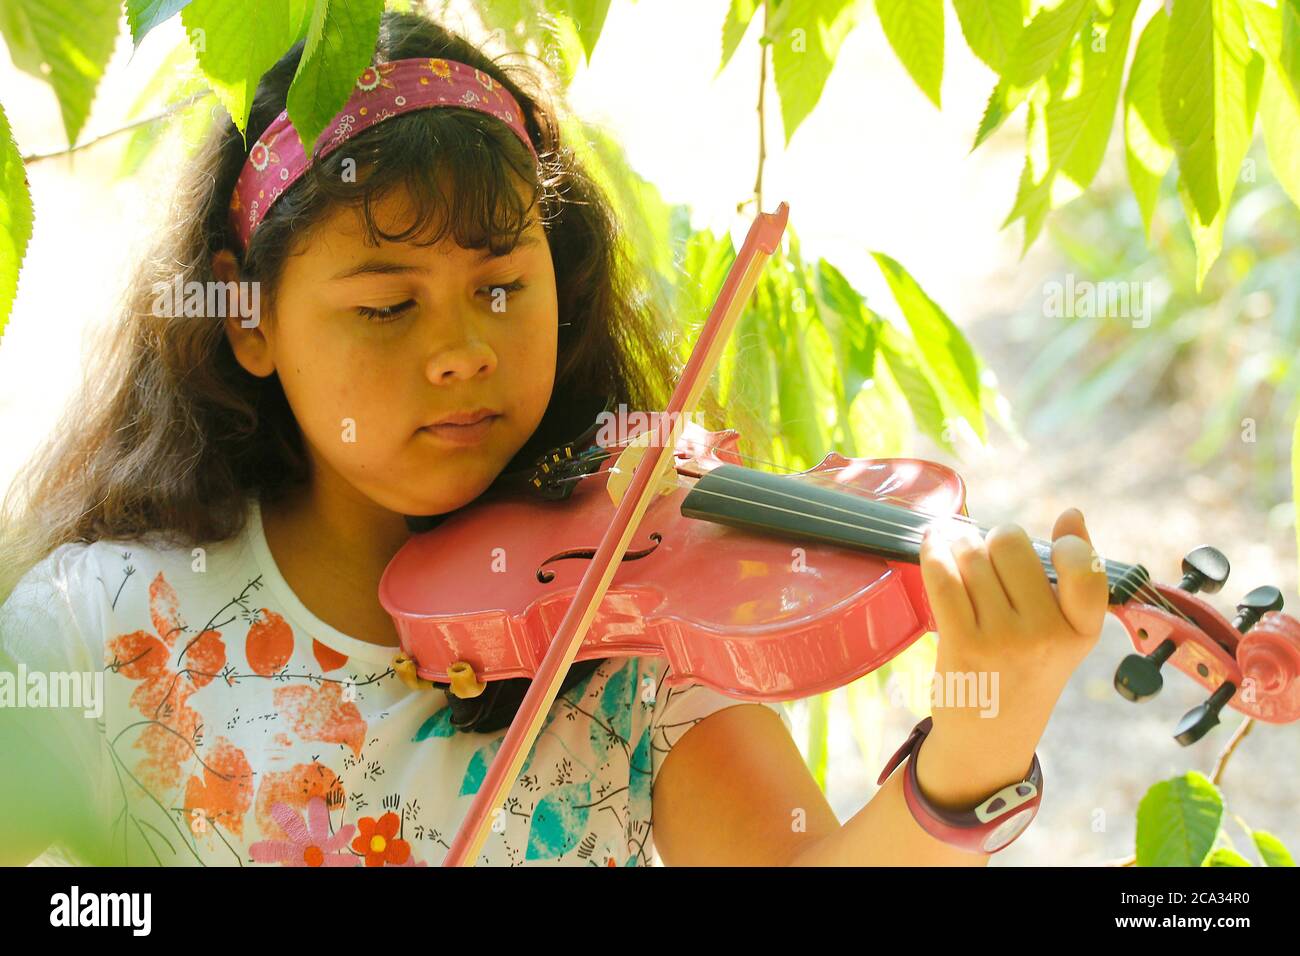 Playing the violin. Stock Photo